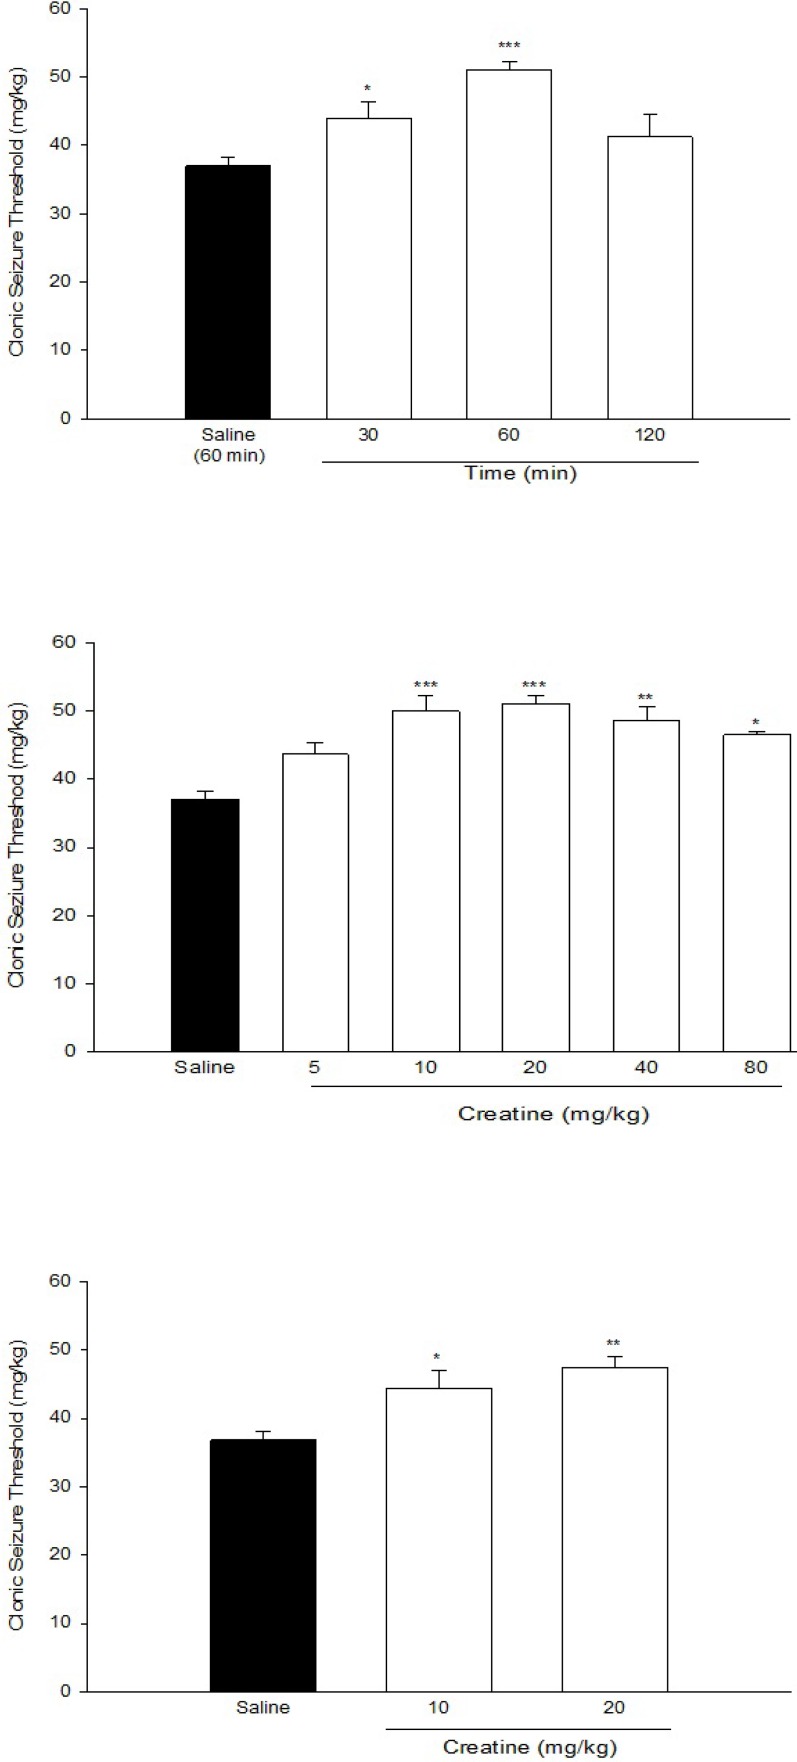 (a) Time course of the anticonvulsant effect of creatine (20 mg/Kg) (b) Effect of acute creatine treatment (c) Effect of sub- chronic creatine treatment on intravenous PTZ-induced seizure threshold in mice. Creatine was administered intraperitoneally. Data are means ± SEM. *P < 0.05, **P < 0.01 and ***P < 0.001 compared with the saline group. Each group consisted of eight to ten mice